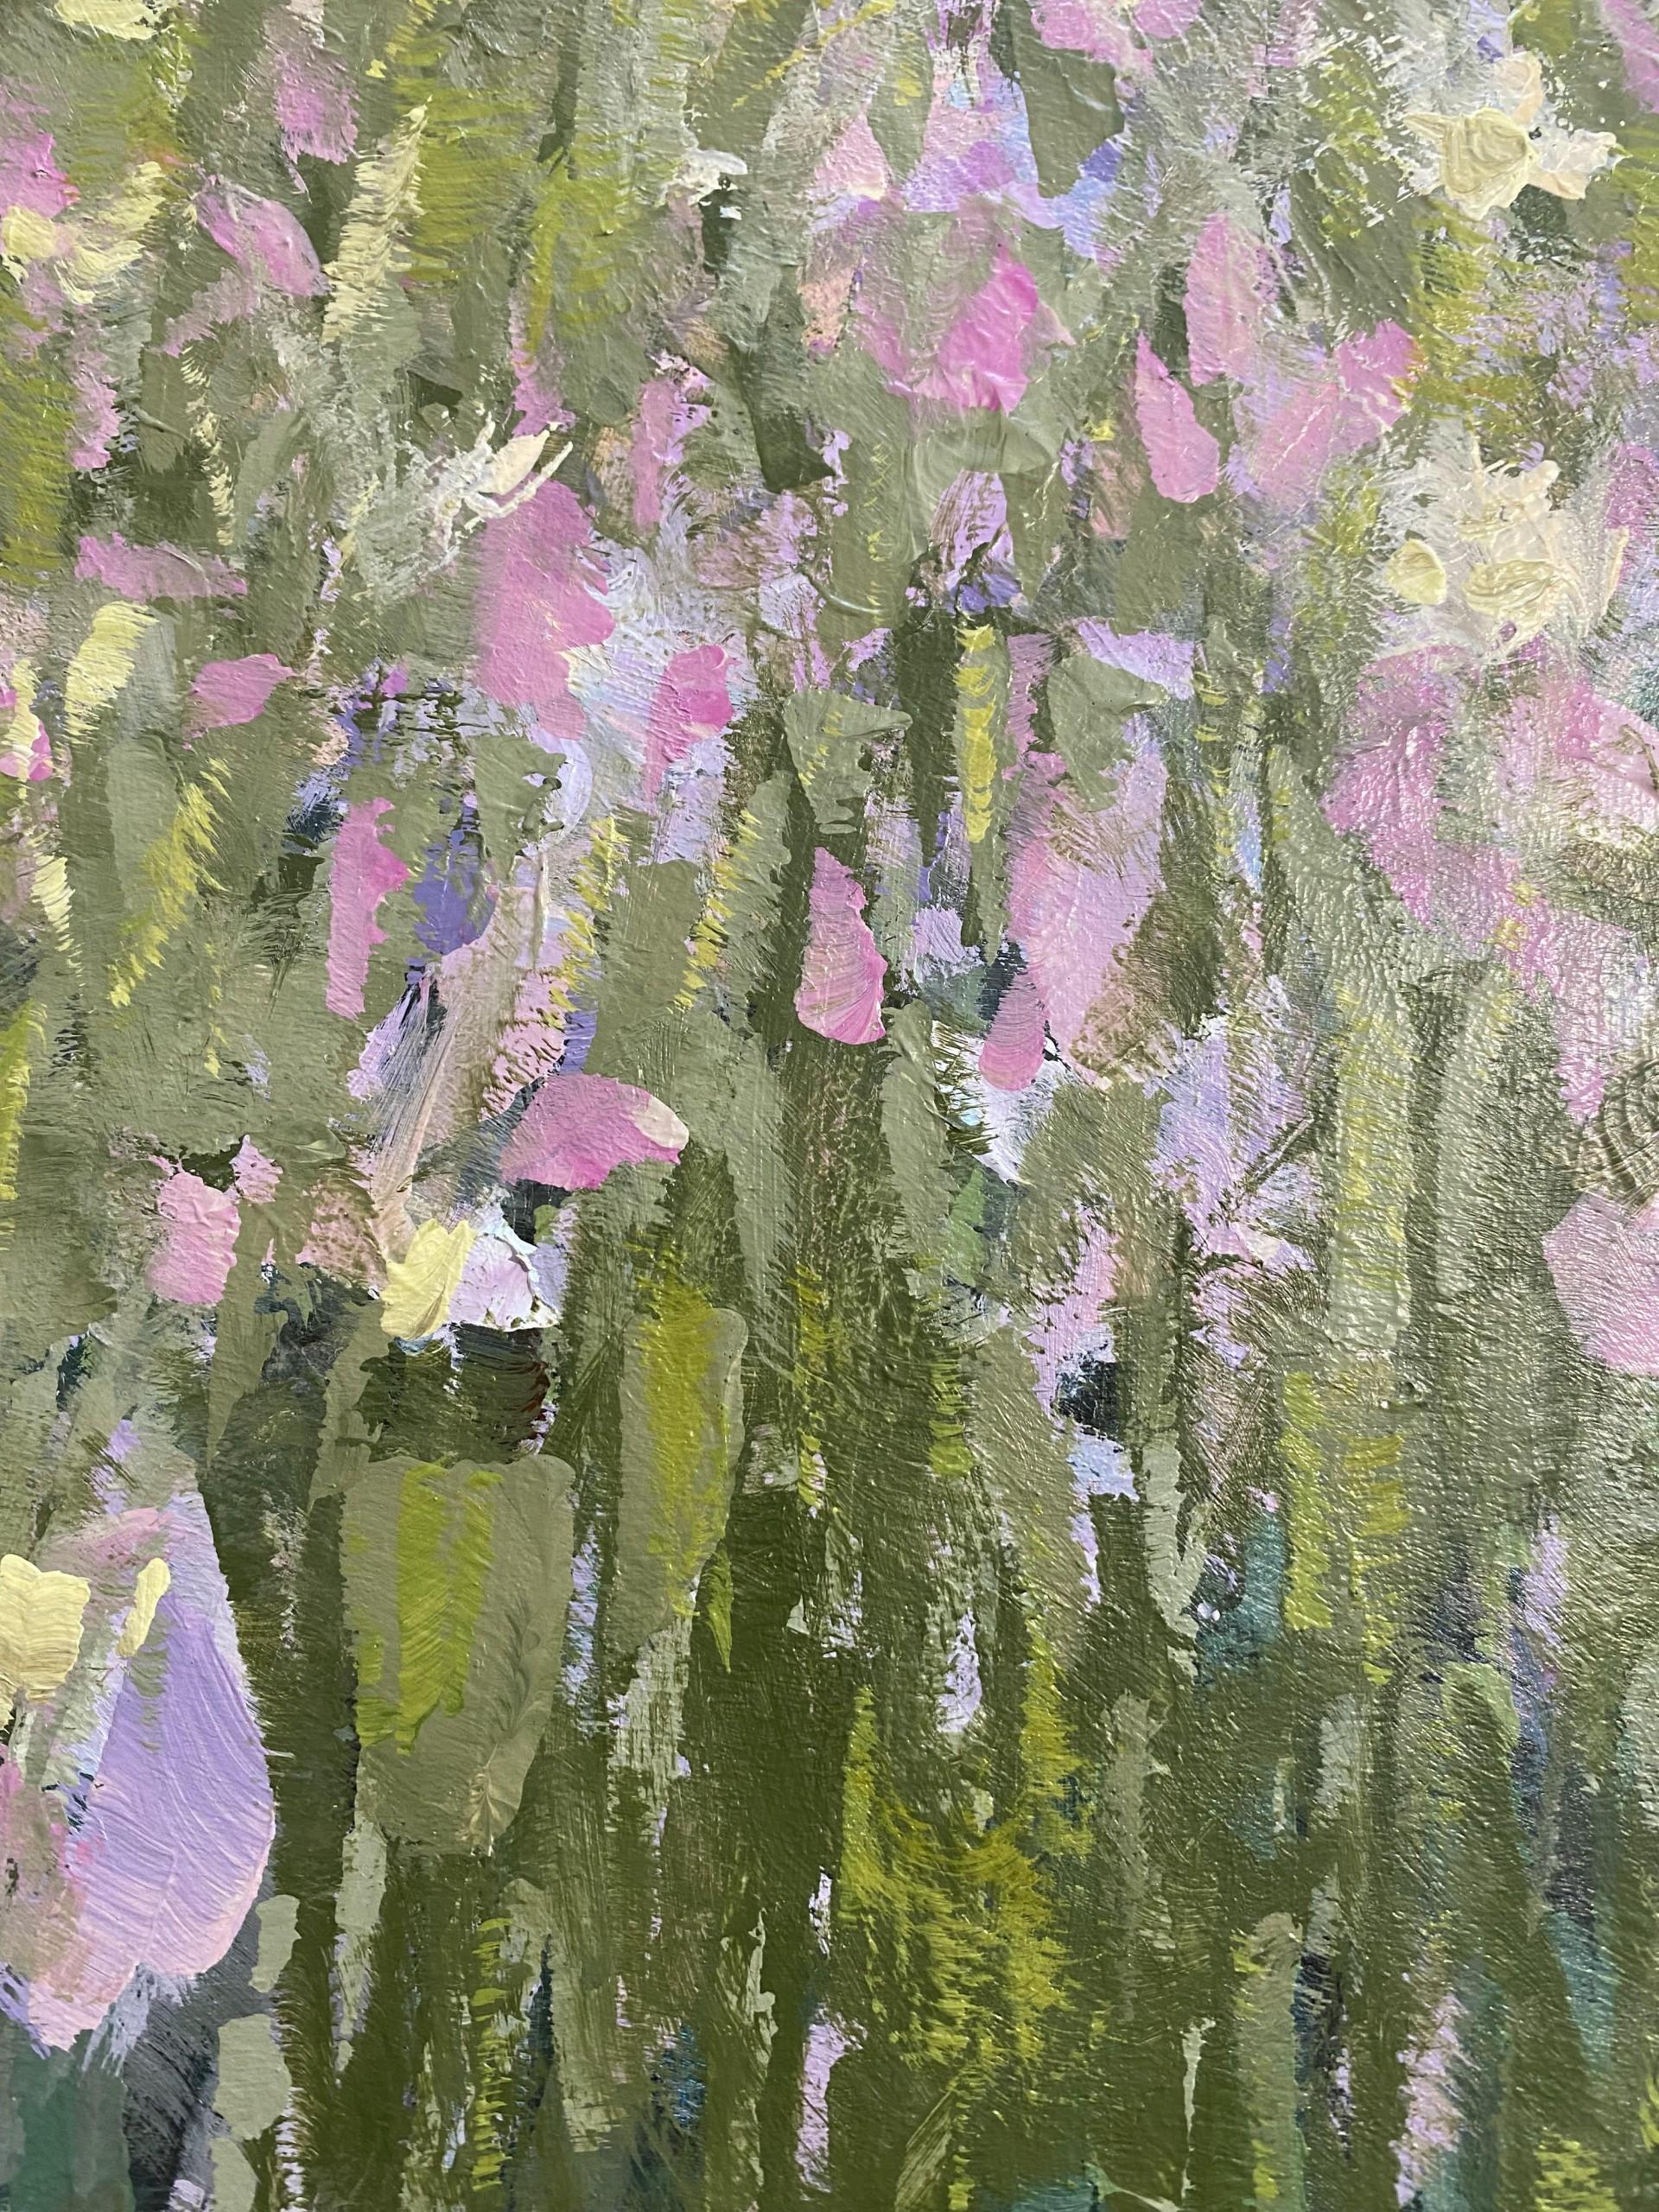 Confetti - Abstract Impressionist Painting by Jo Cottam